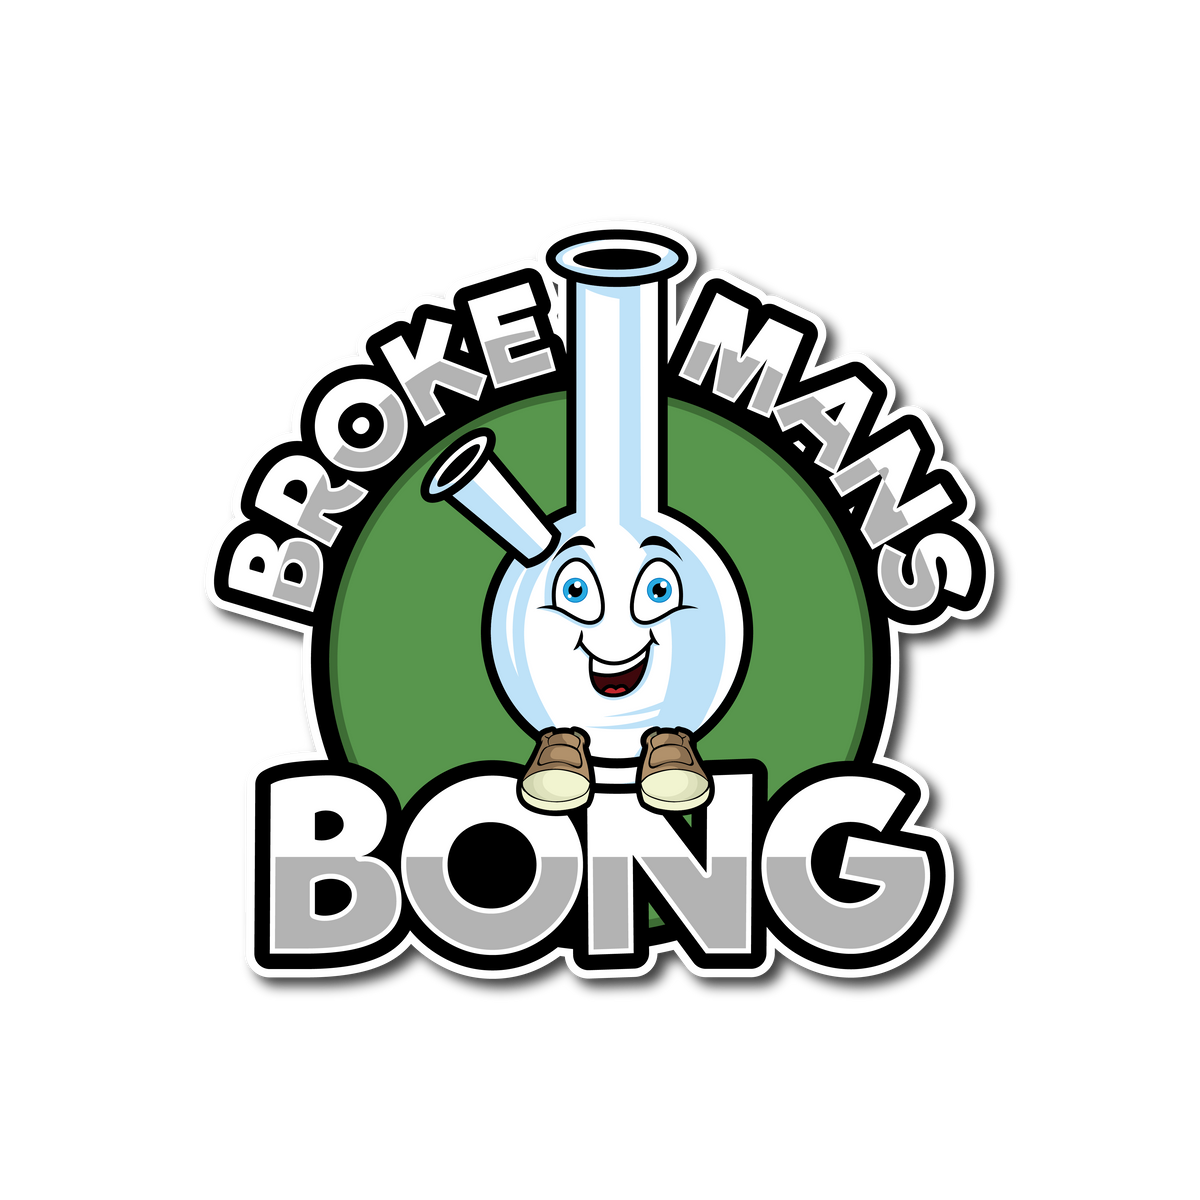 Broke Mans Bong | Specializing in glass water bongs & good vibes, our online headshop also provides products such as -  smoking pipes, bubblers, vaporizers, rigs, bowls & bangers, herb grinders... For tobacco & legal-use only.